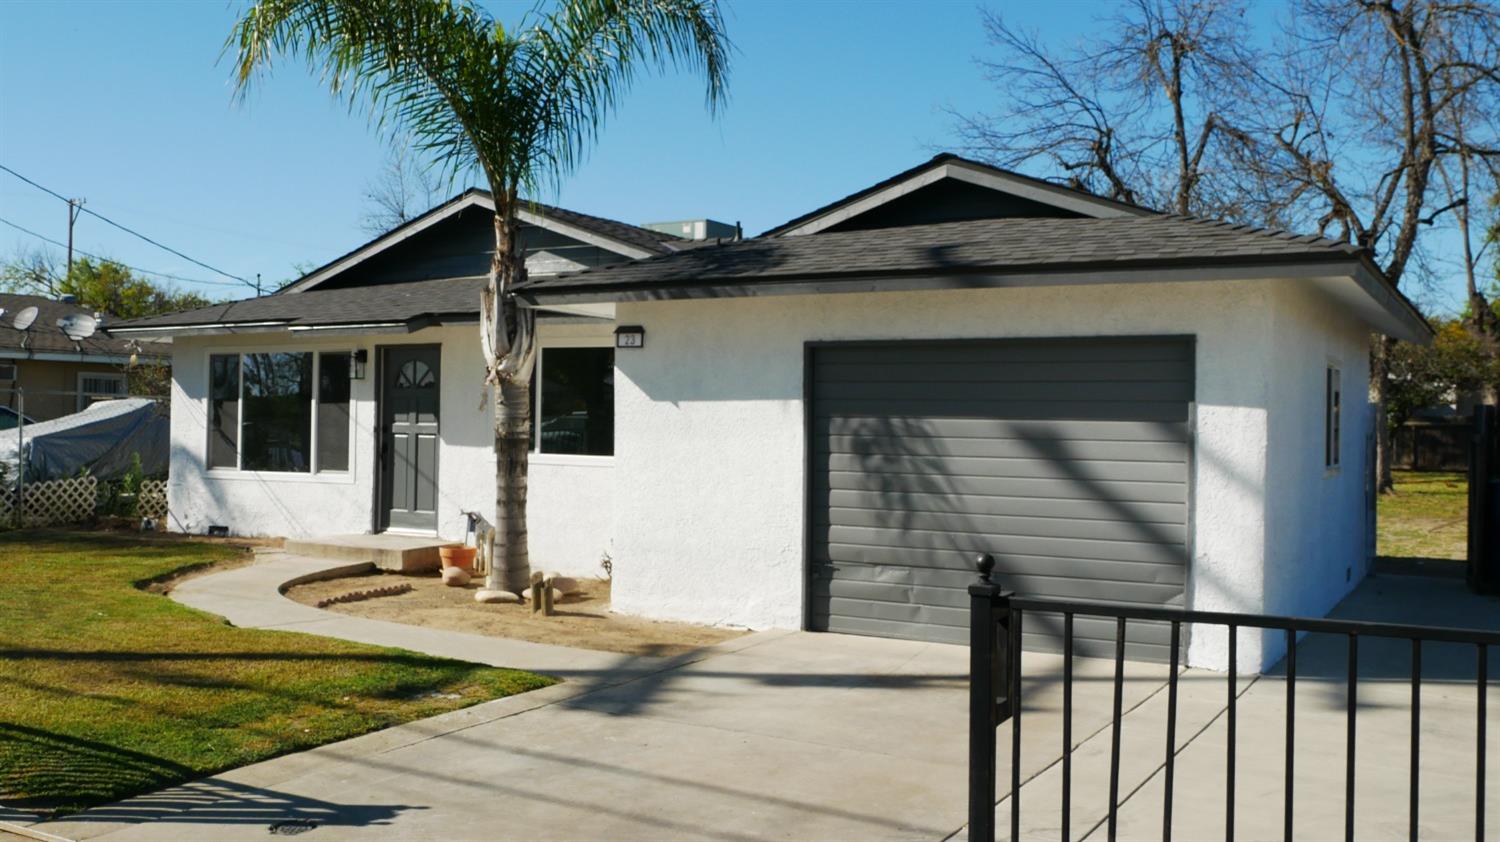 Photo of 23 E Geary St in Fresno, CA